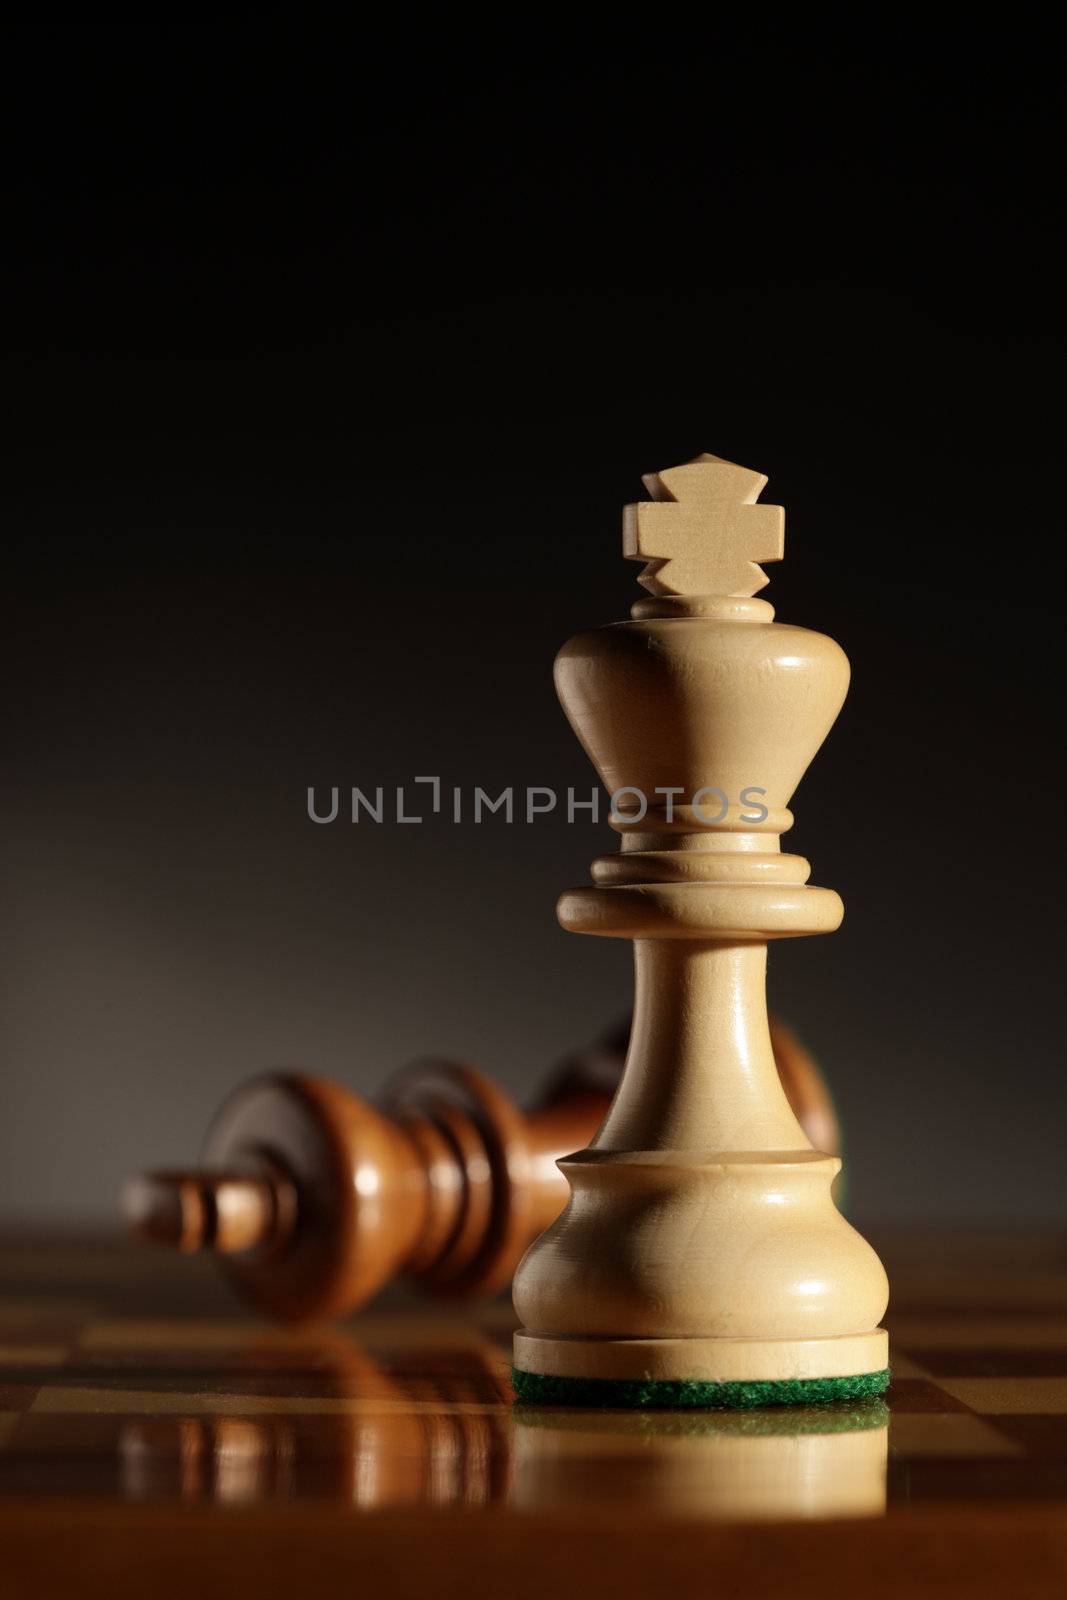 king chess piece with others in background. Low depth of field, focus on foreground.